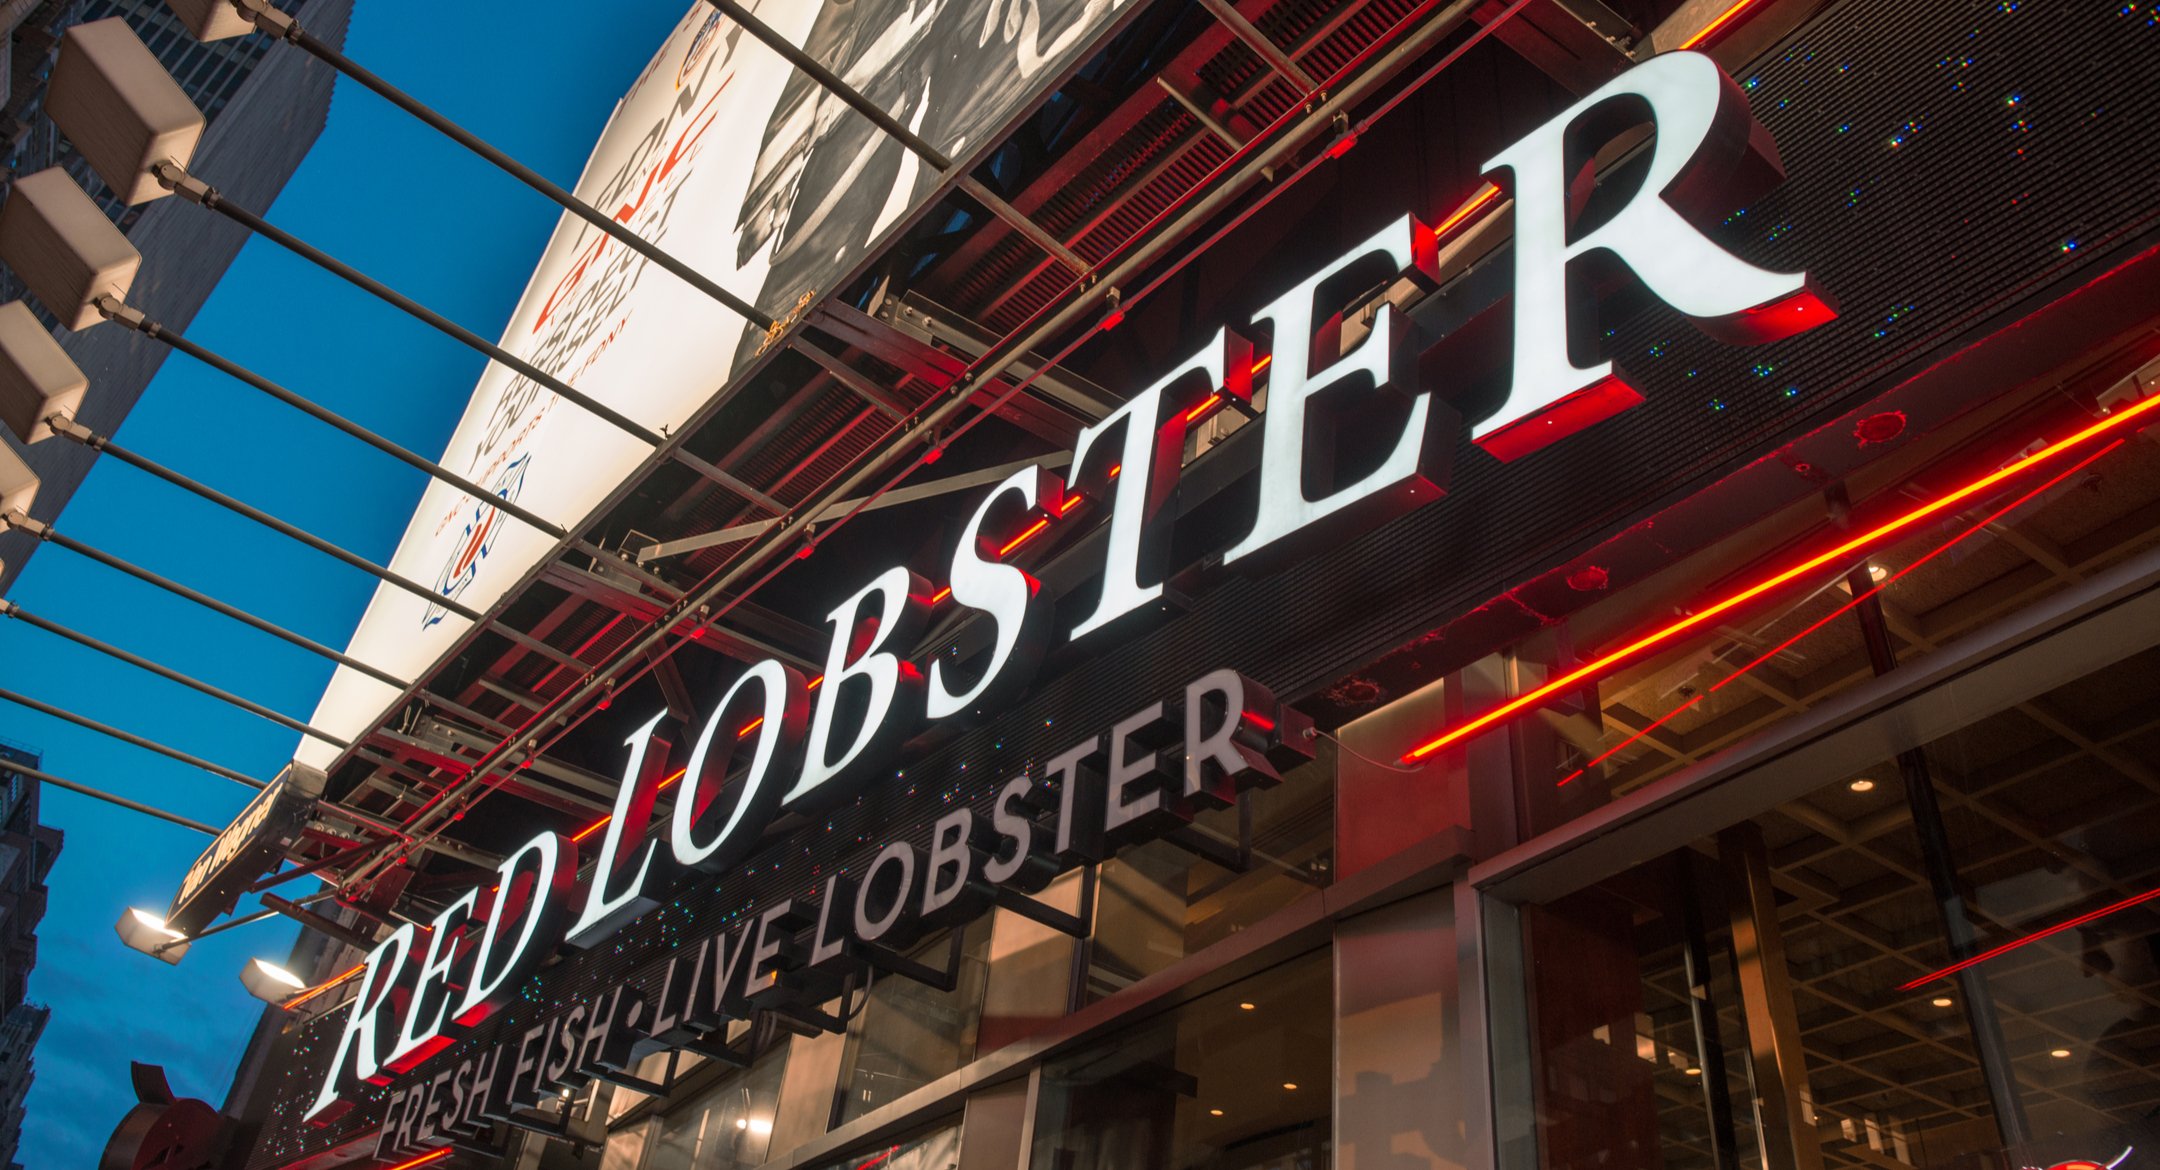  A Red Lobster restaurant in New York, US. Red Lobster is owned by Thai Union Group. Credit: pisaphotography/Shutterstock.com